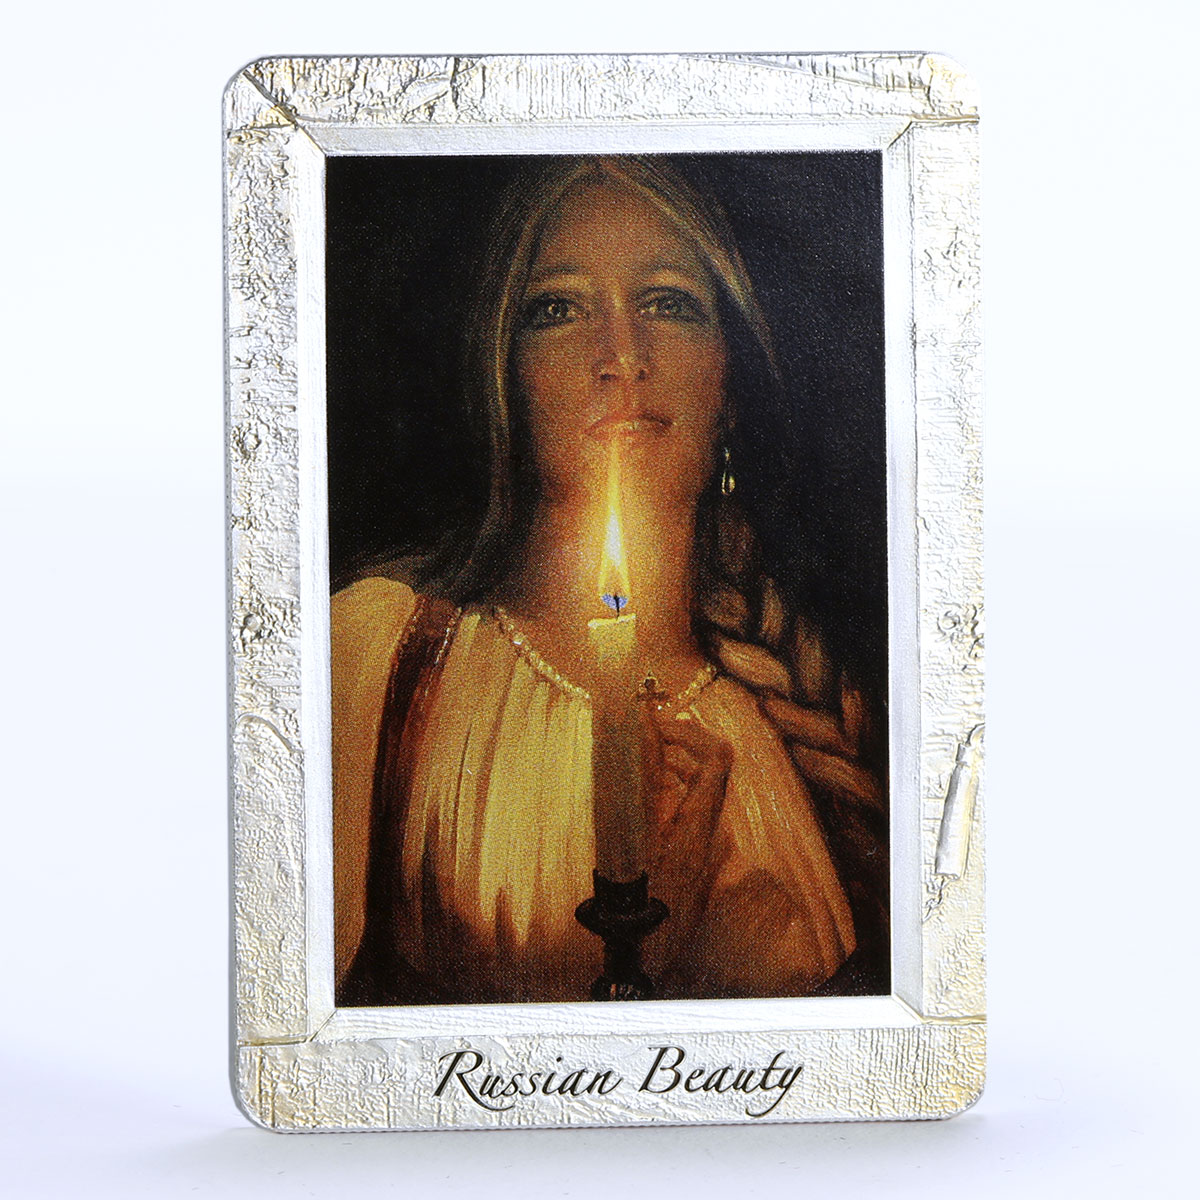 Niue 2 dollars Russian Beauty Girl with Candle Art colored silver coin 2012